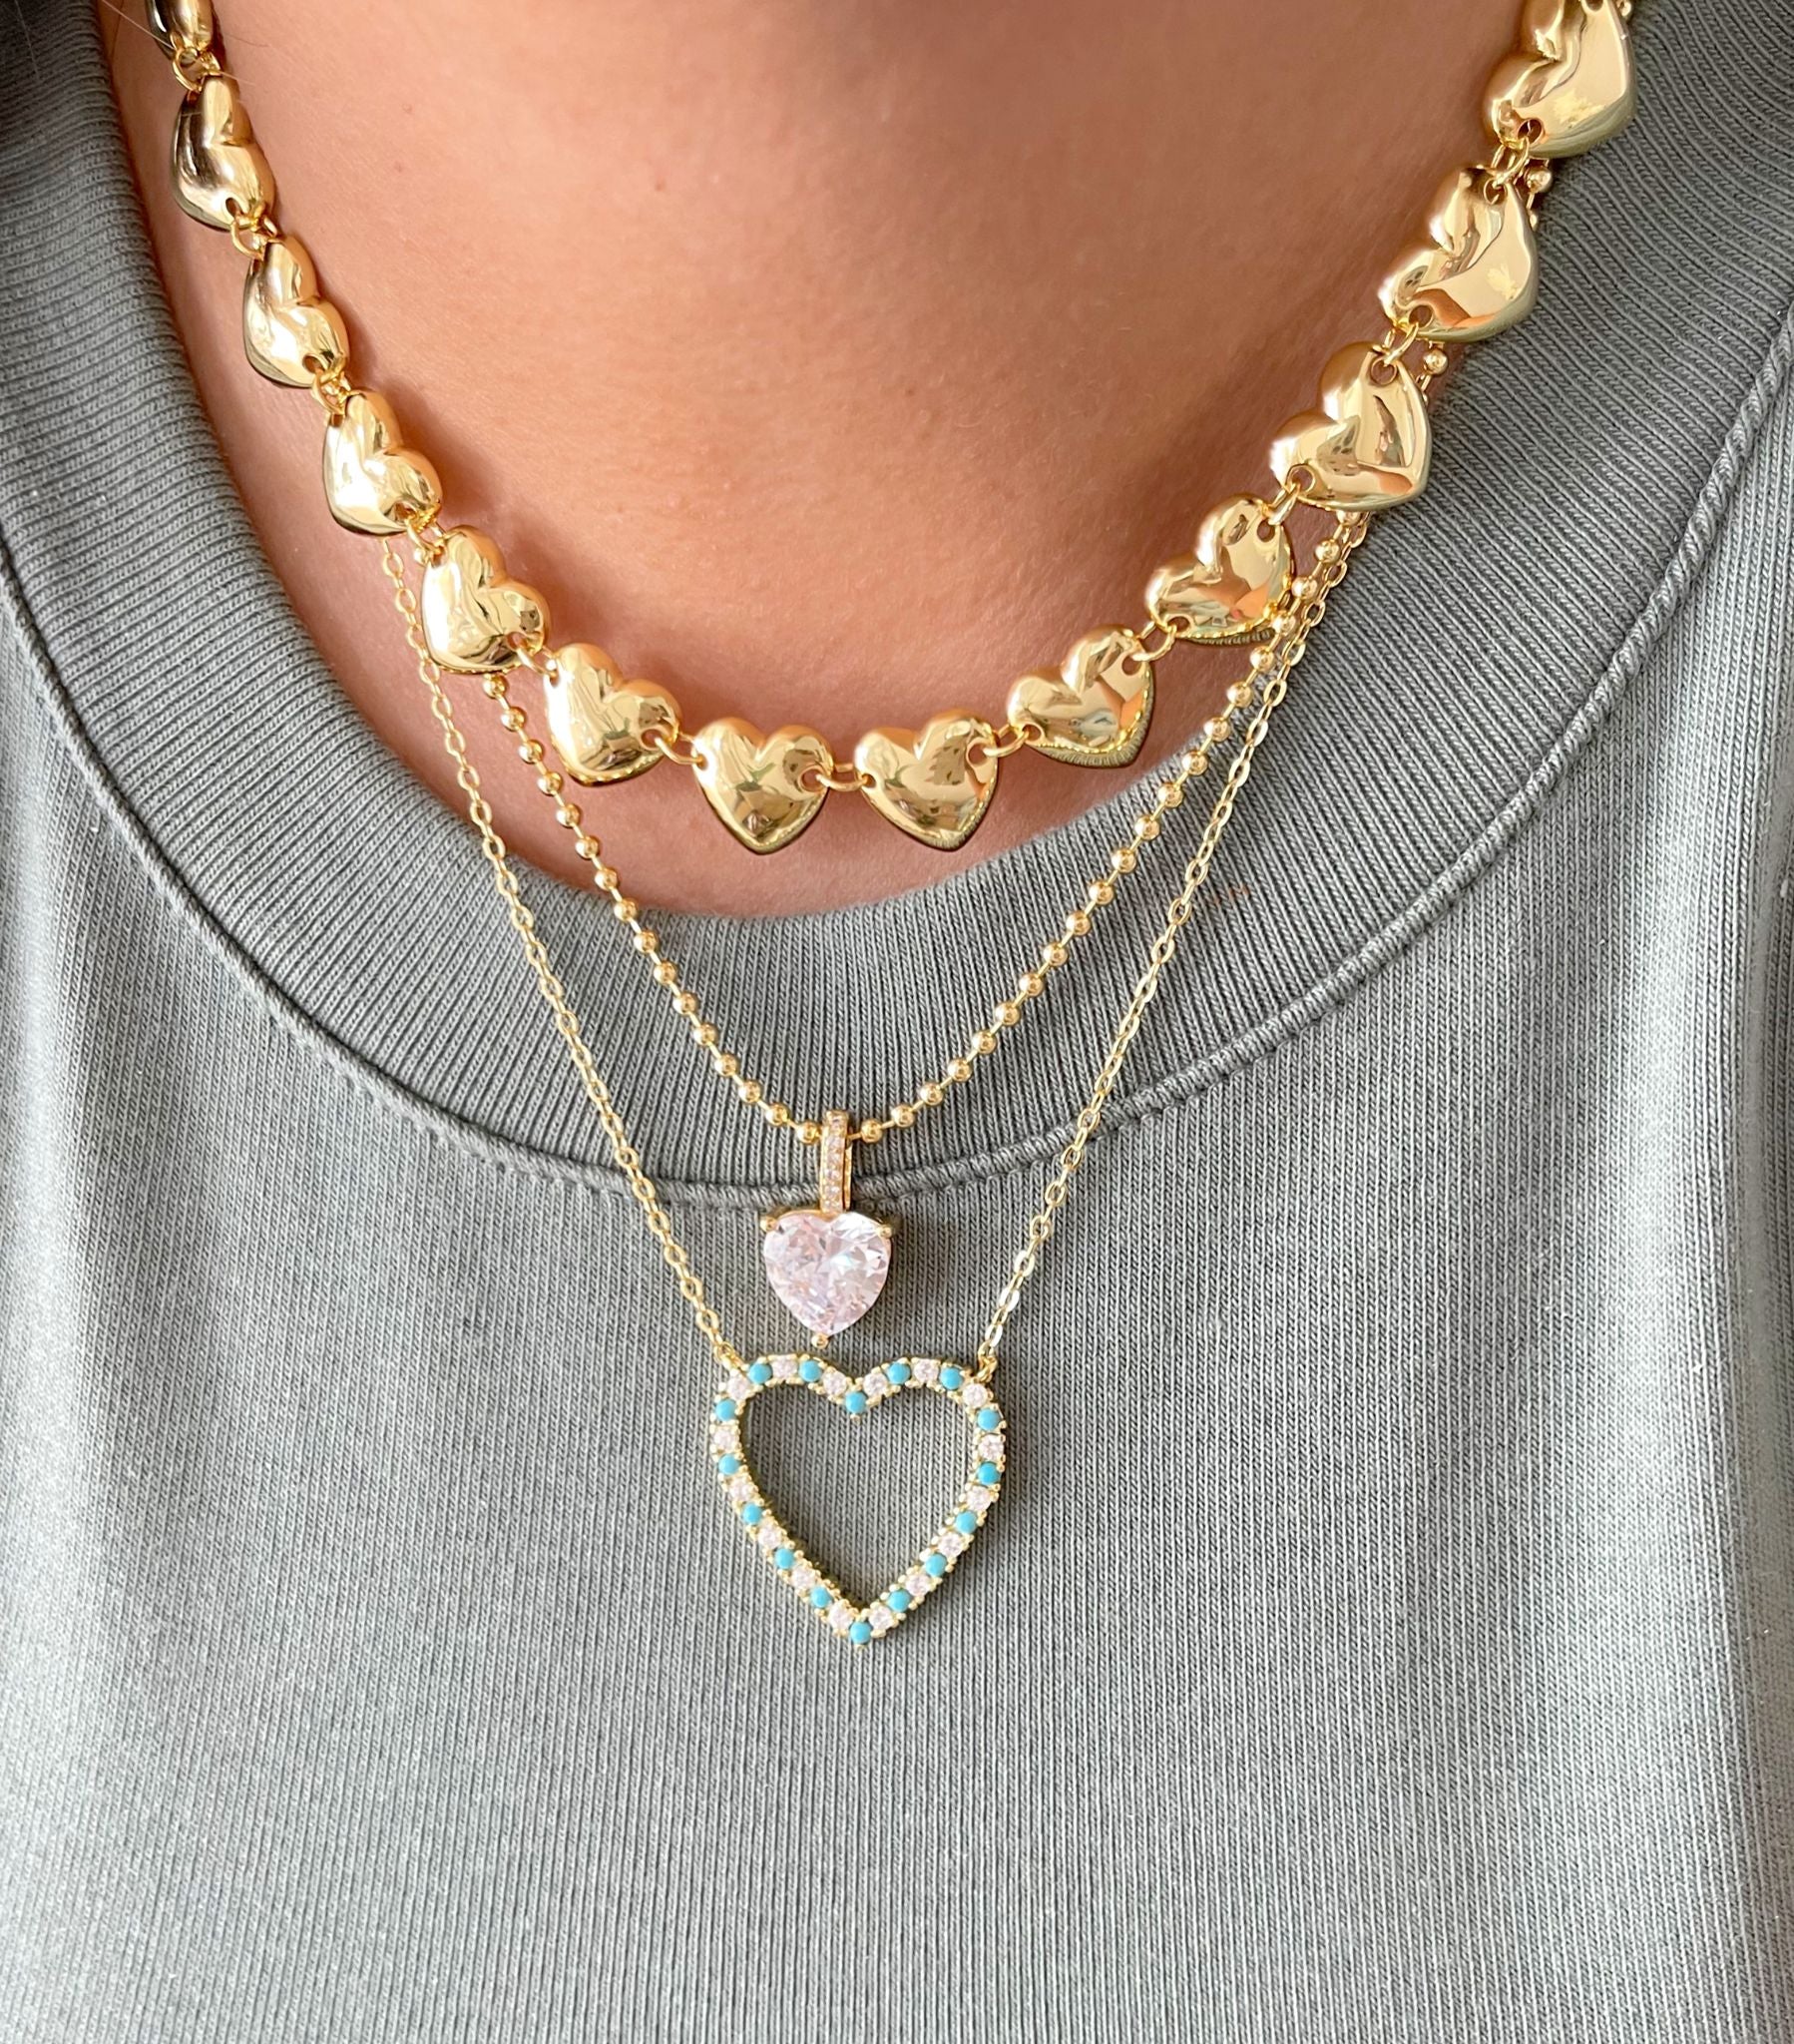 Crystal heart necklace